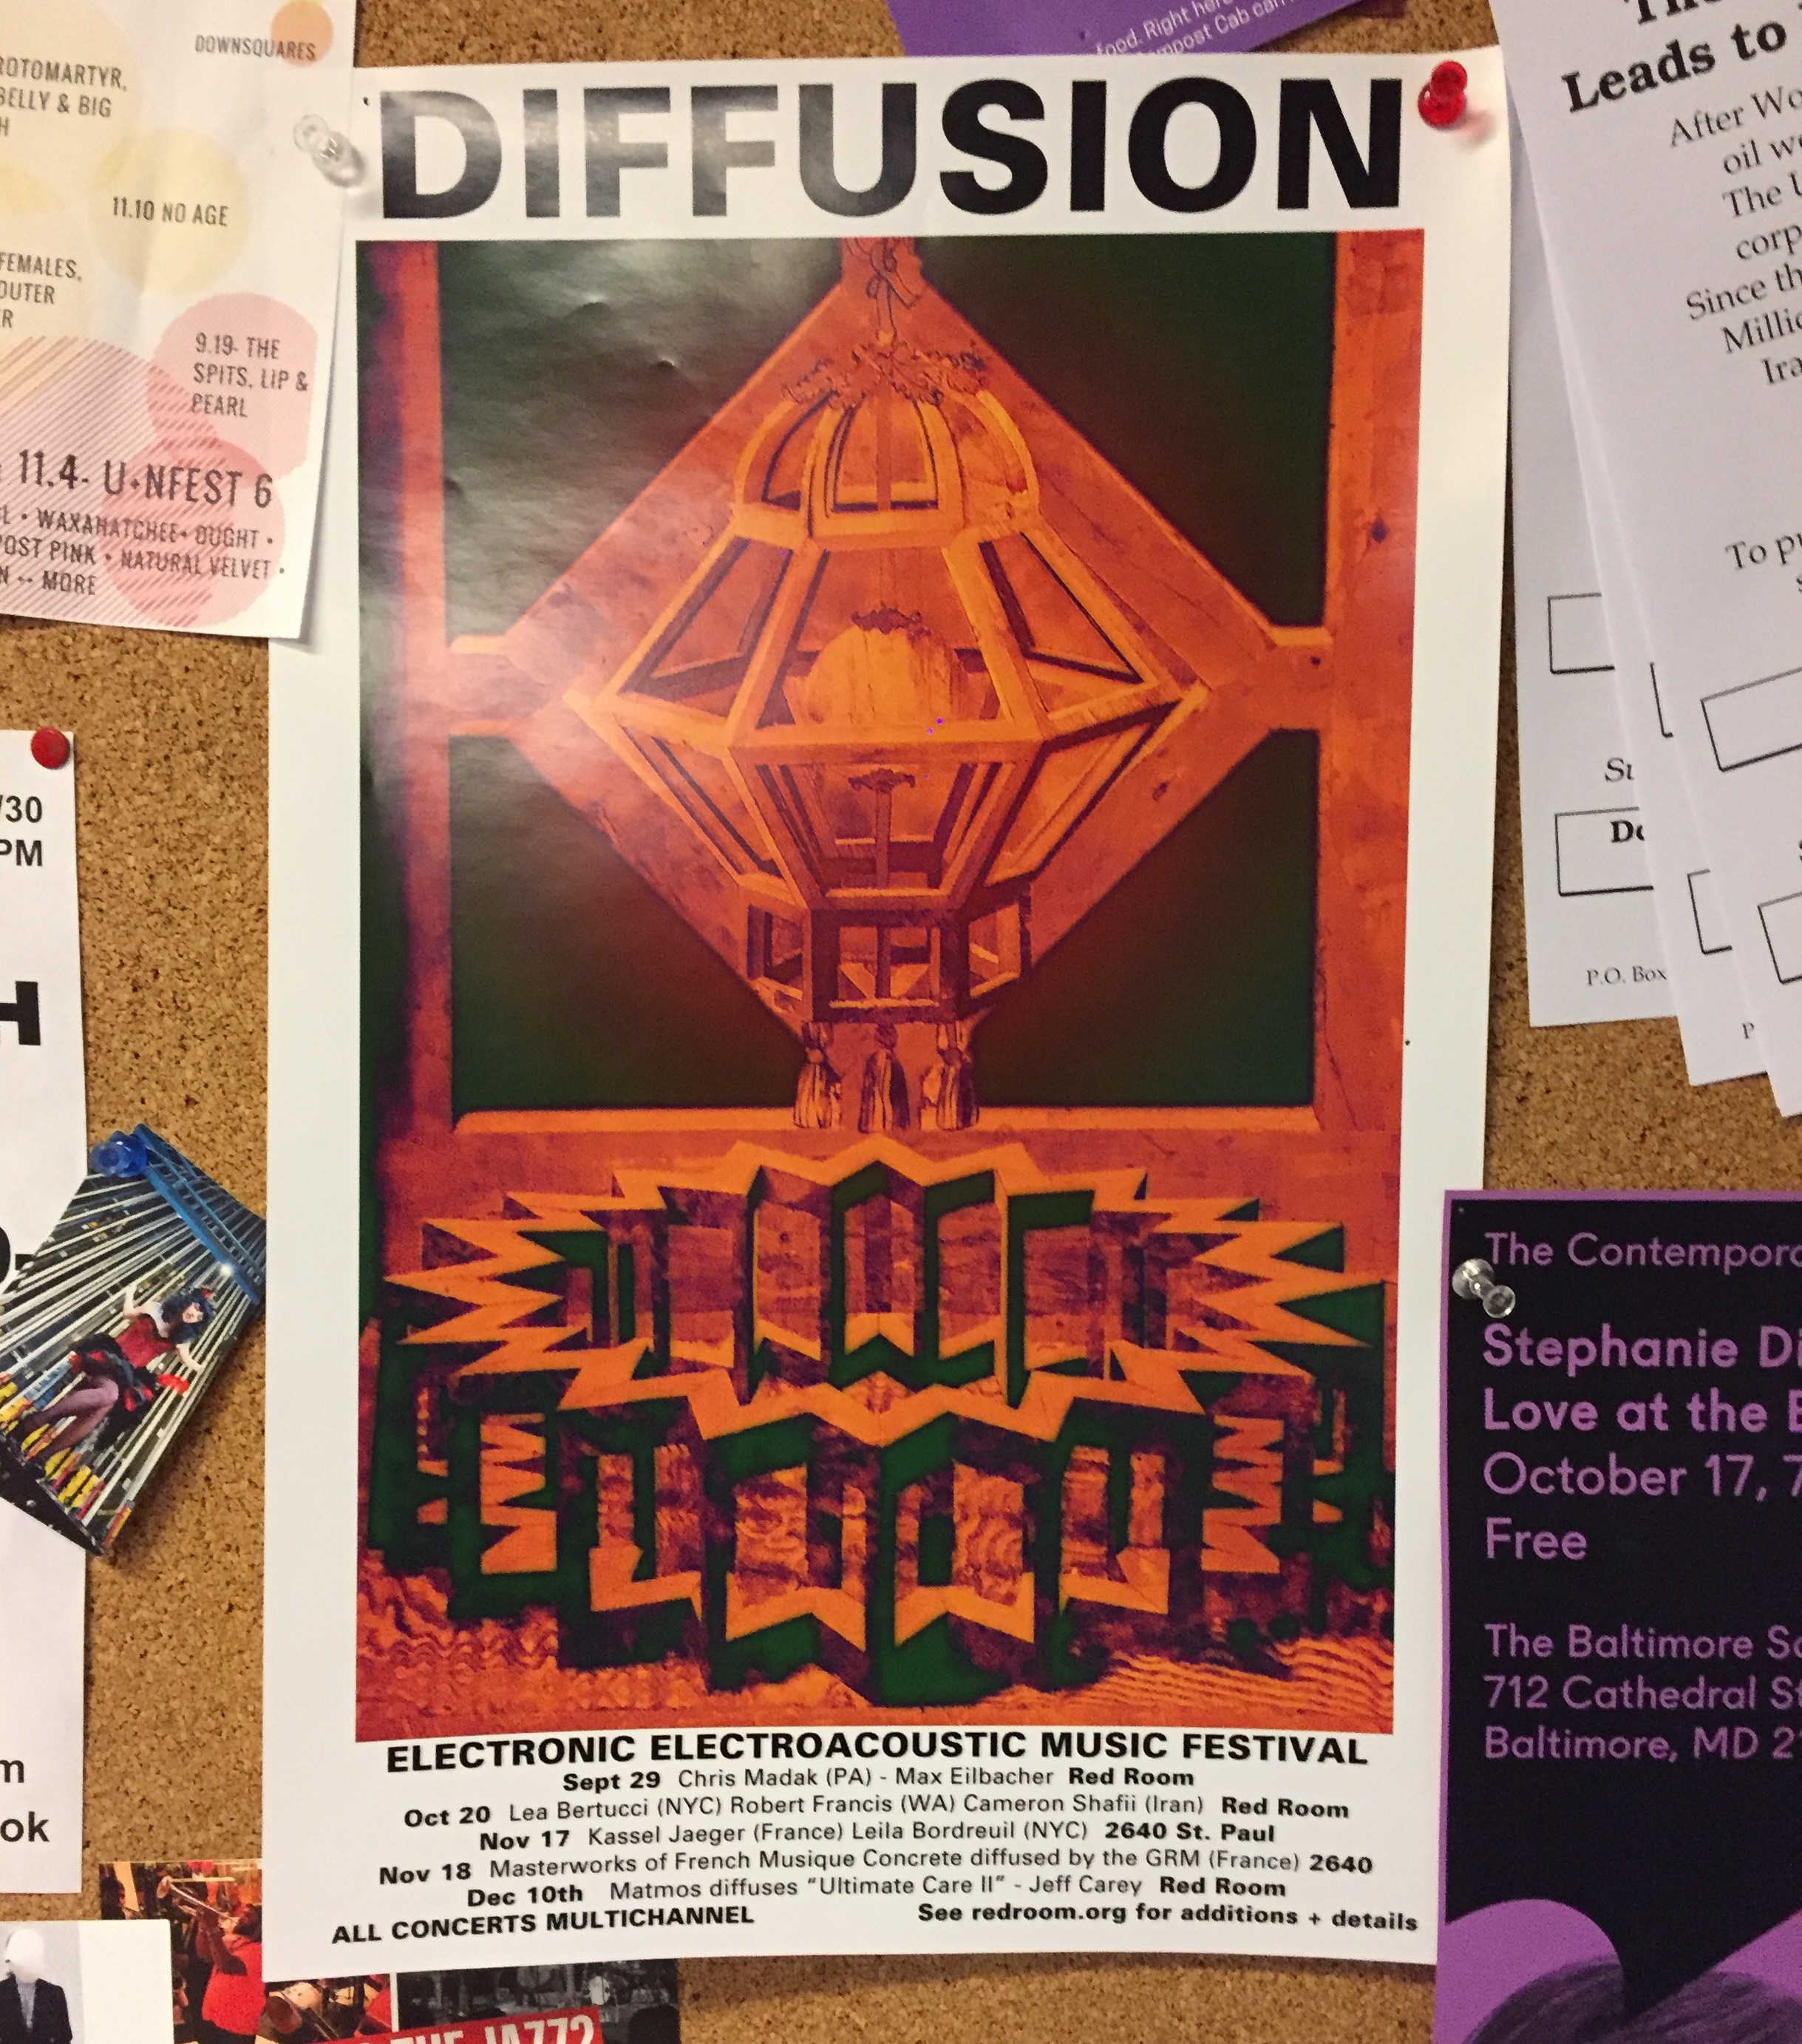 Poster for the Diffusion Festival for multi-channel electronic music